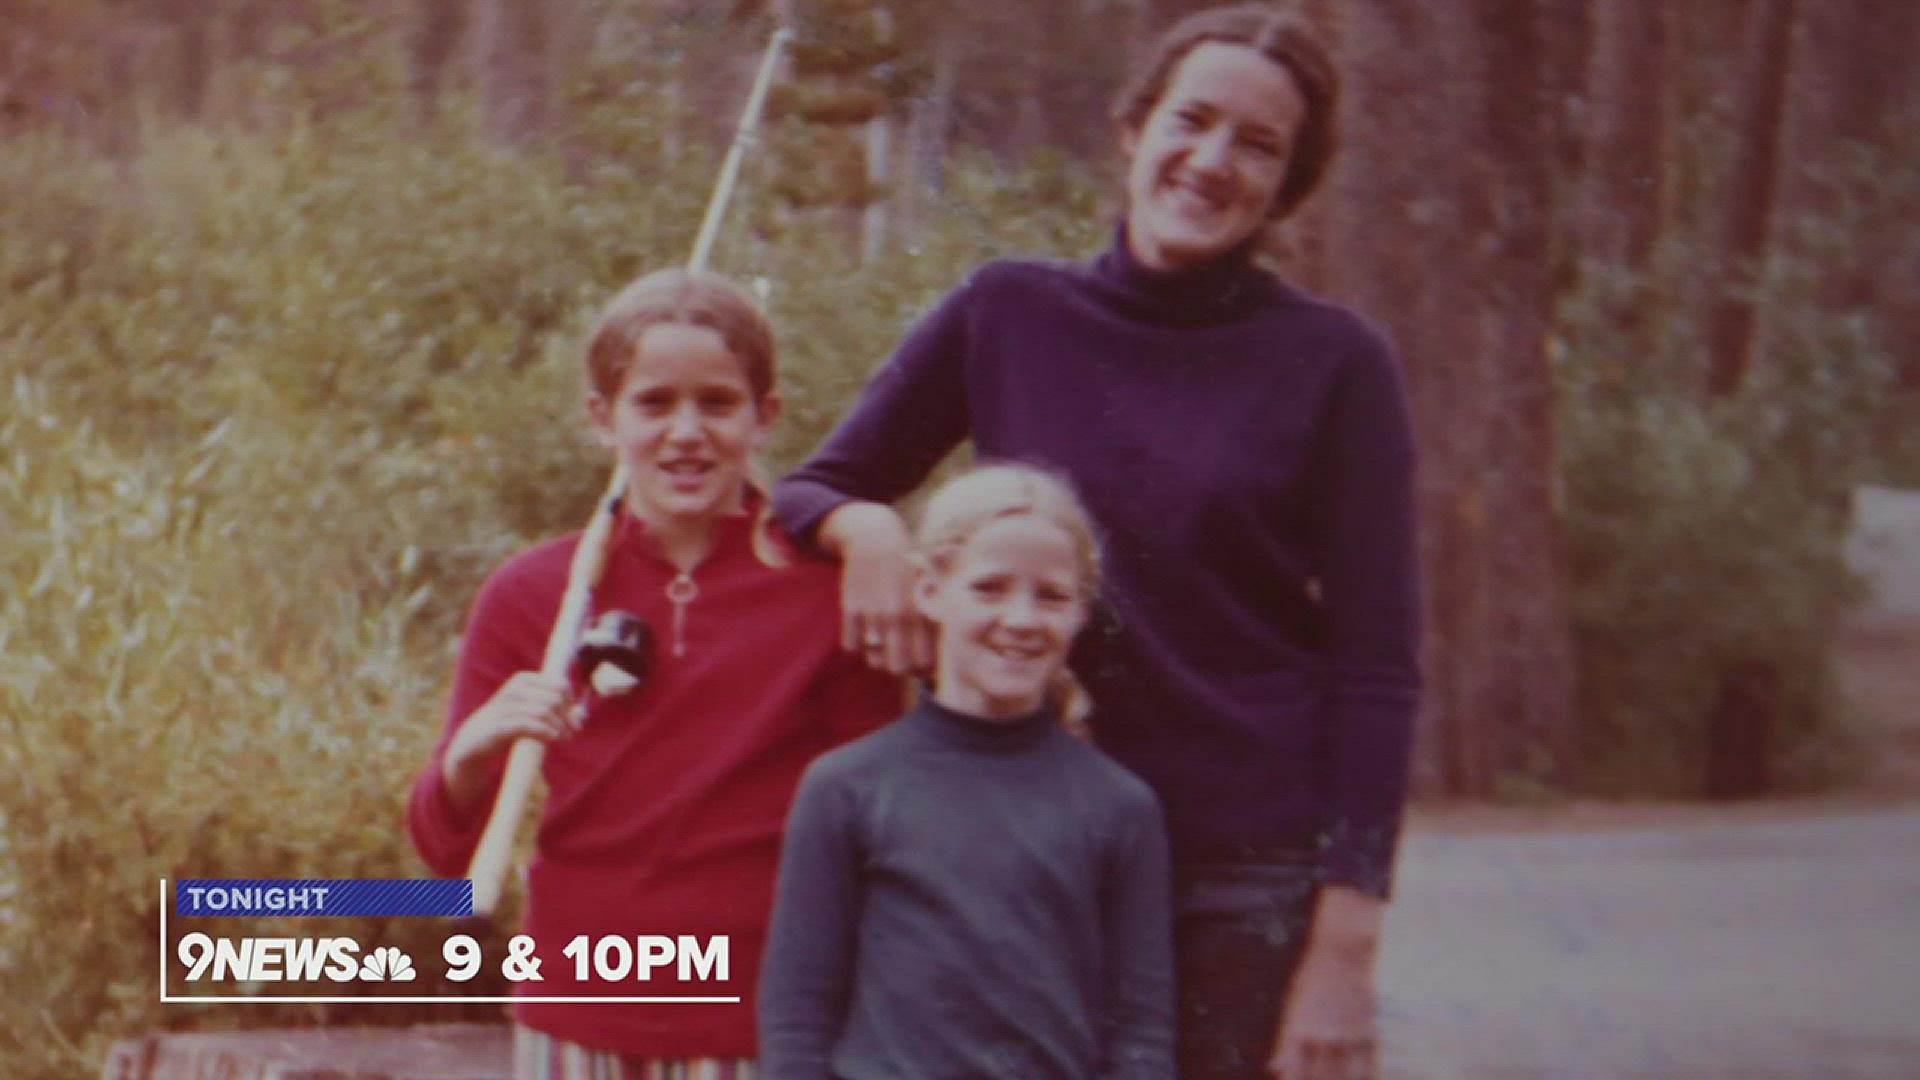 Monday night at 9 and 10 p.m., 9Wants to Know investigates how DNA evidence used to crack the 1973 cold case could help police solve other murders.